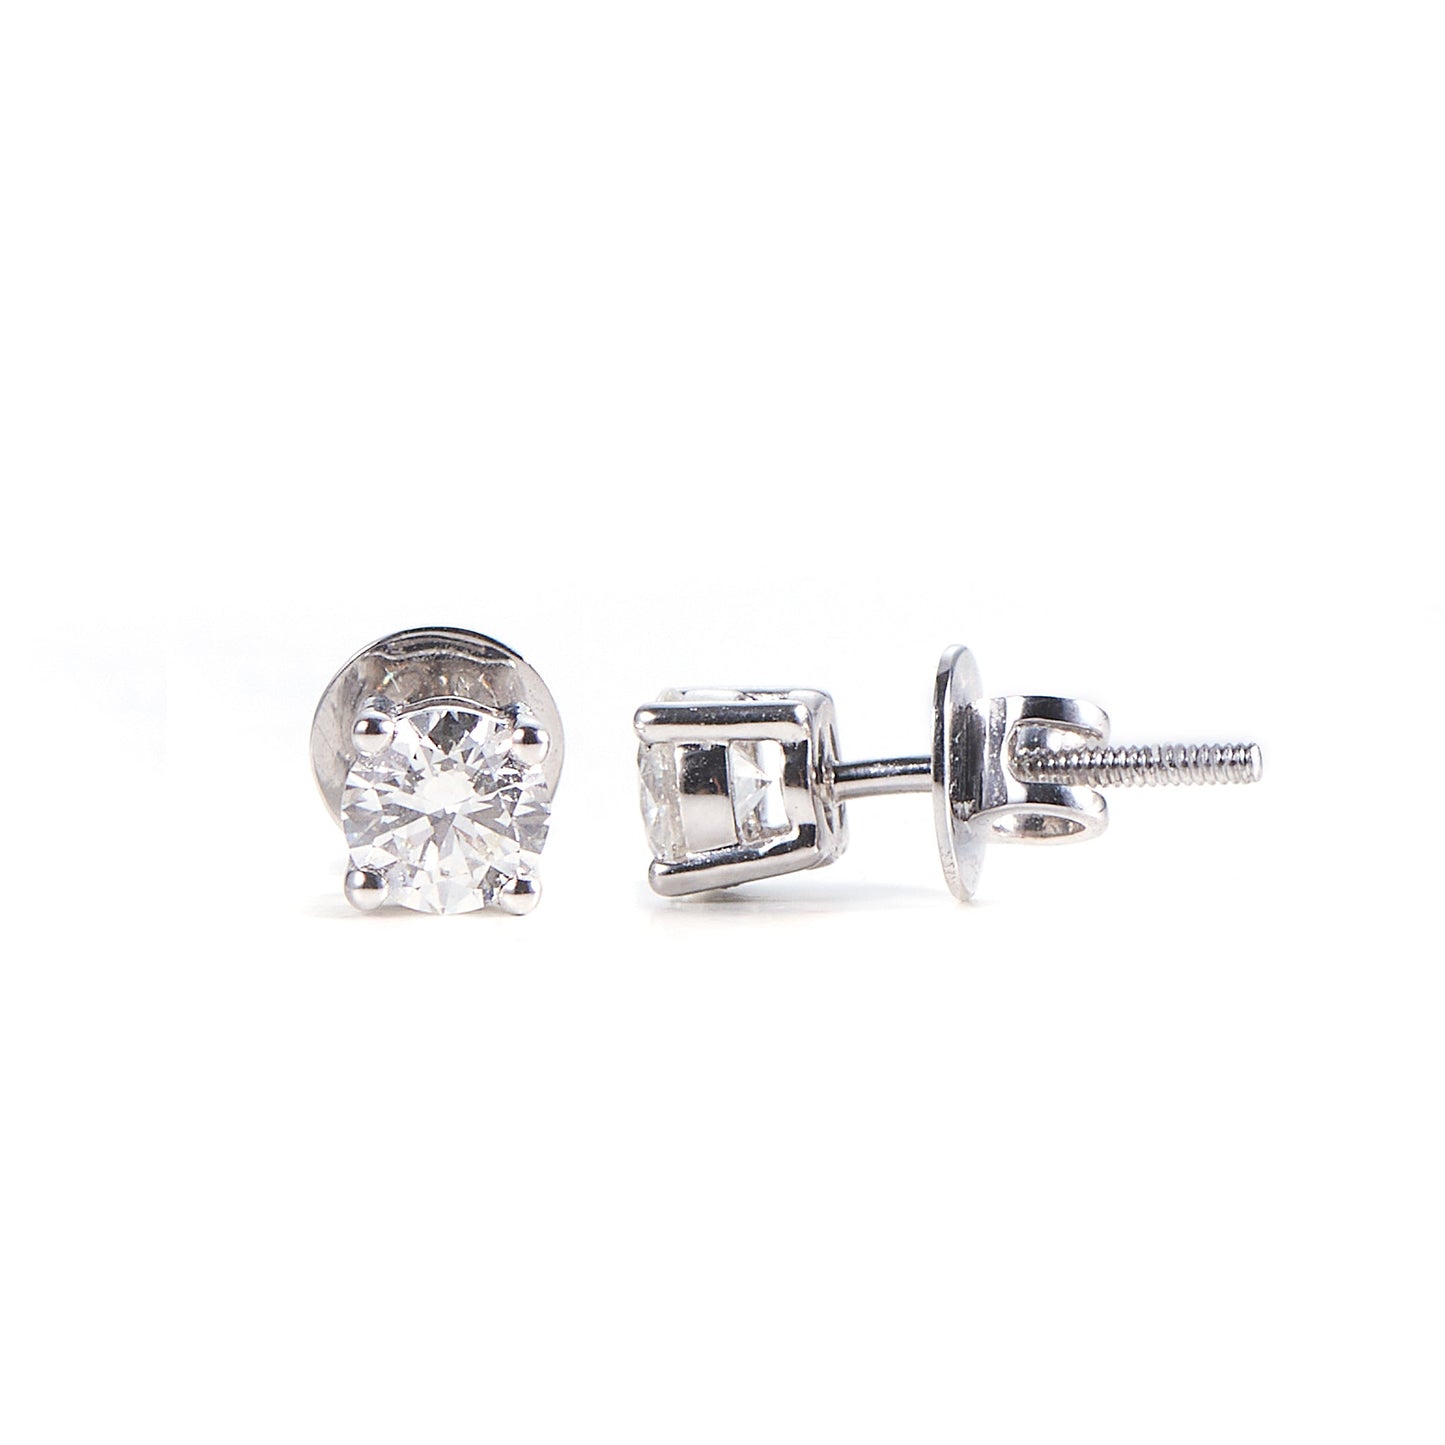 SOLITAIRE STUDS WITH 0.40 crts Diamonds